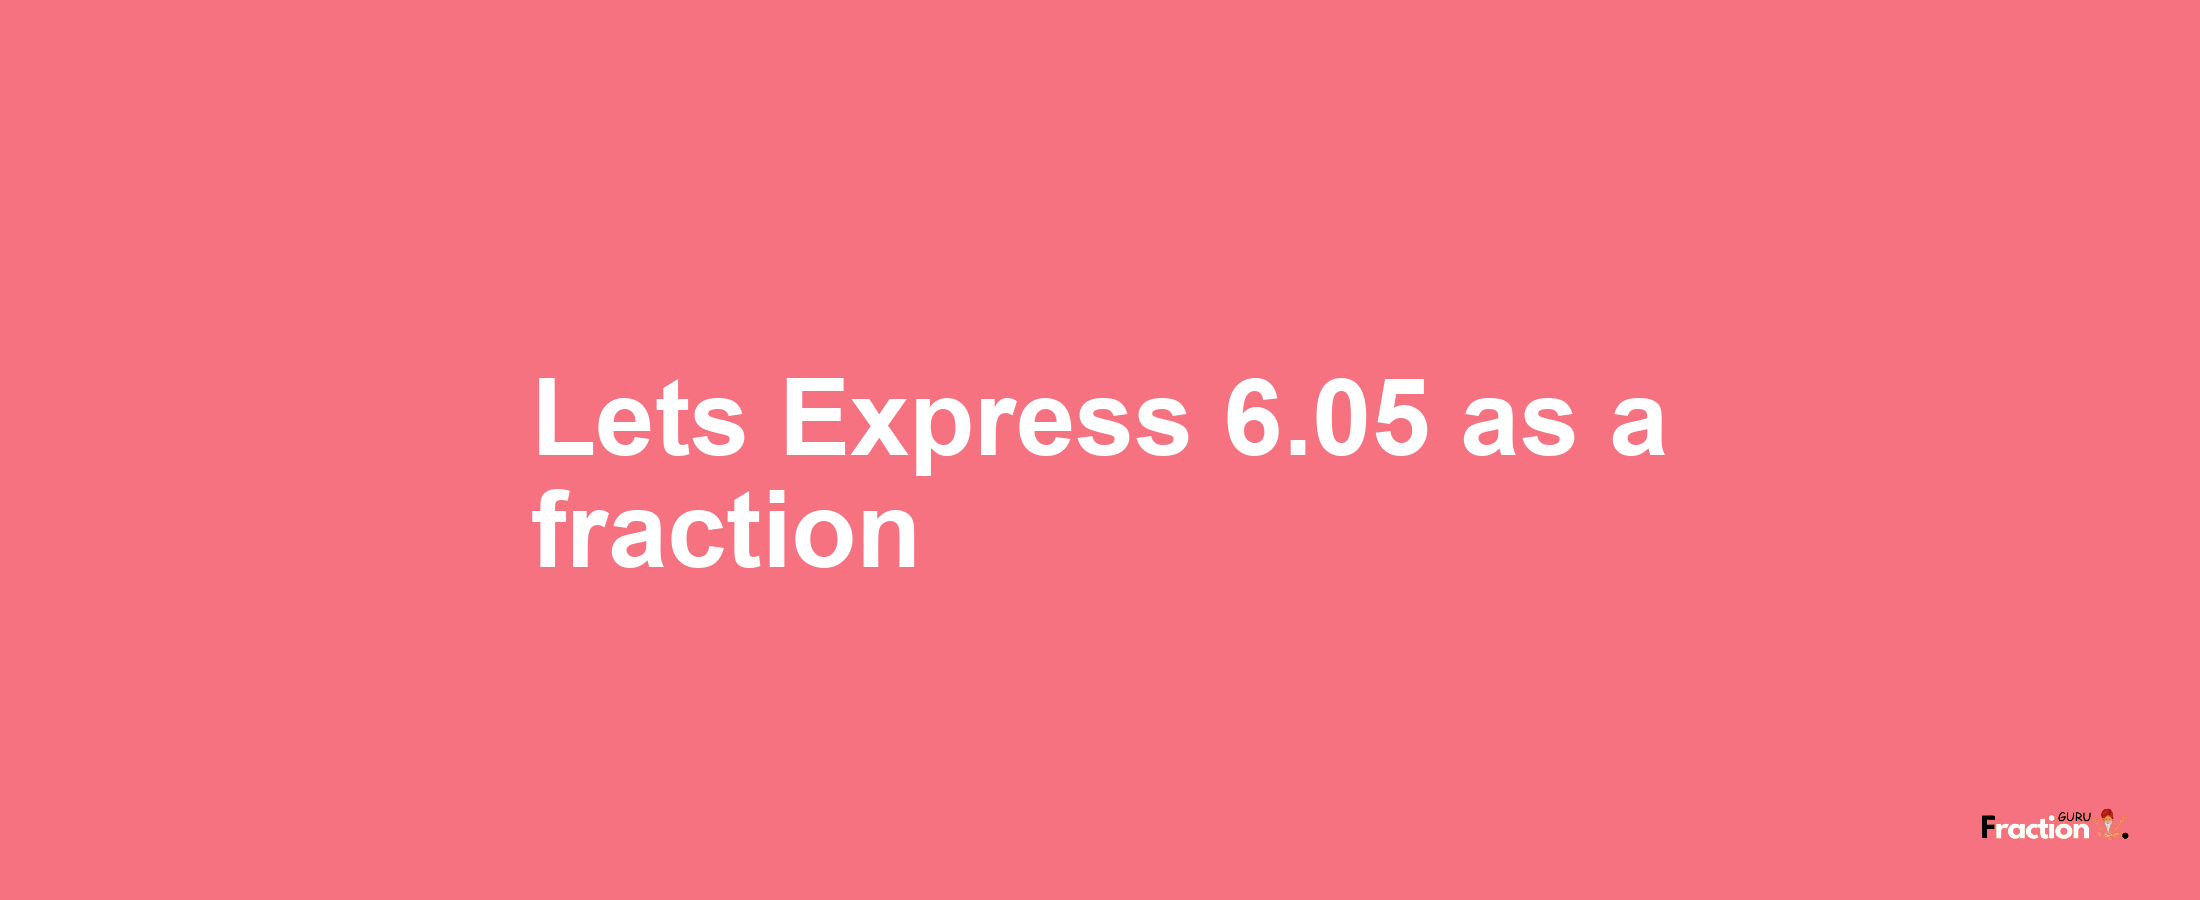 Lets Express 6.05 as afraction